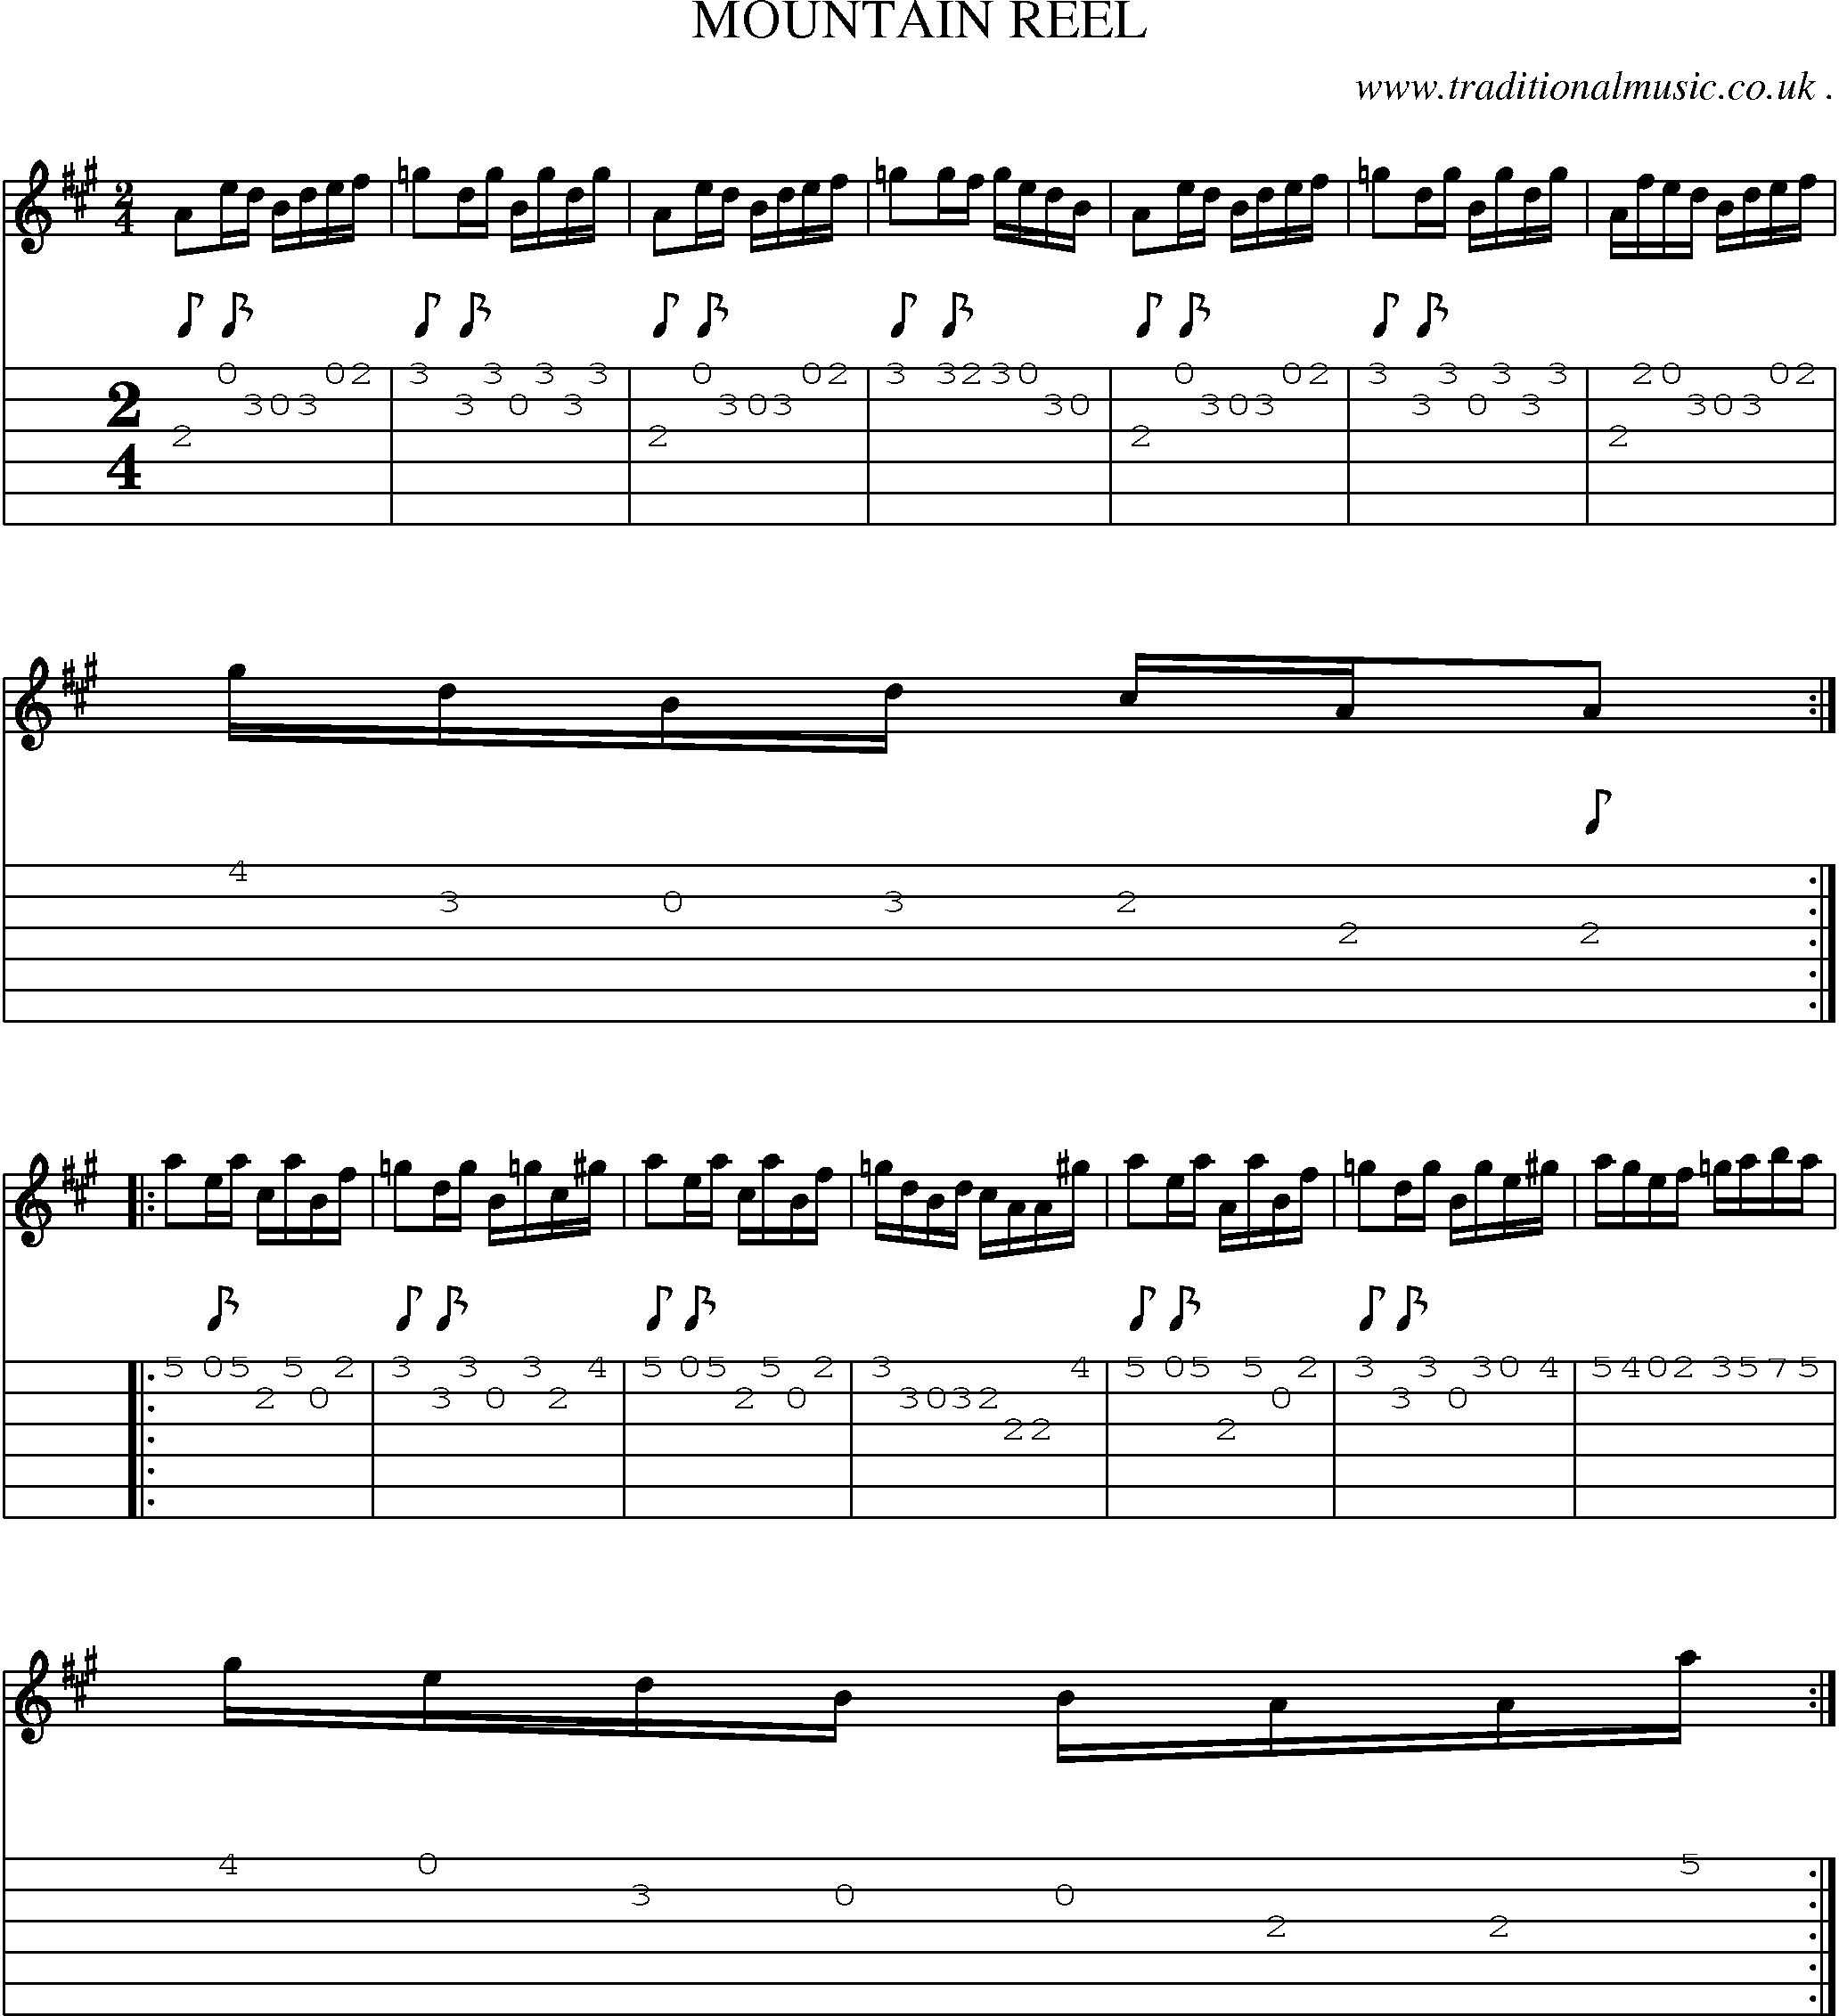 Sheet-Music and Guitar Tabs for Mountain Reel